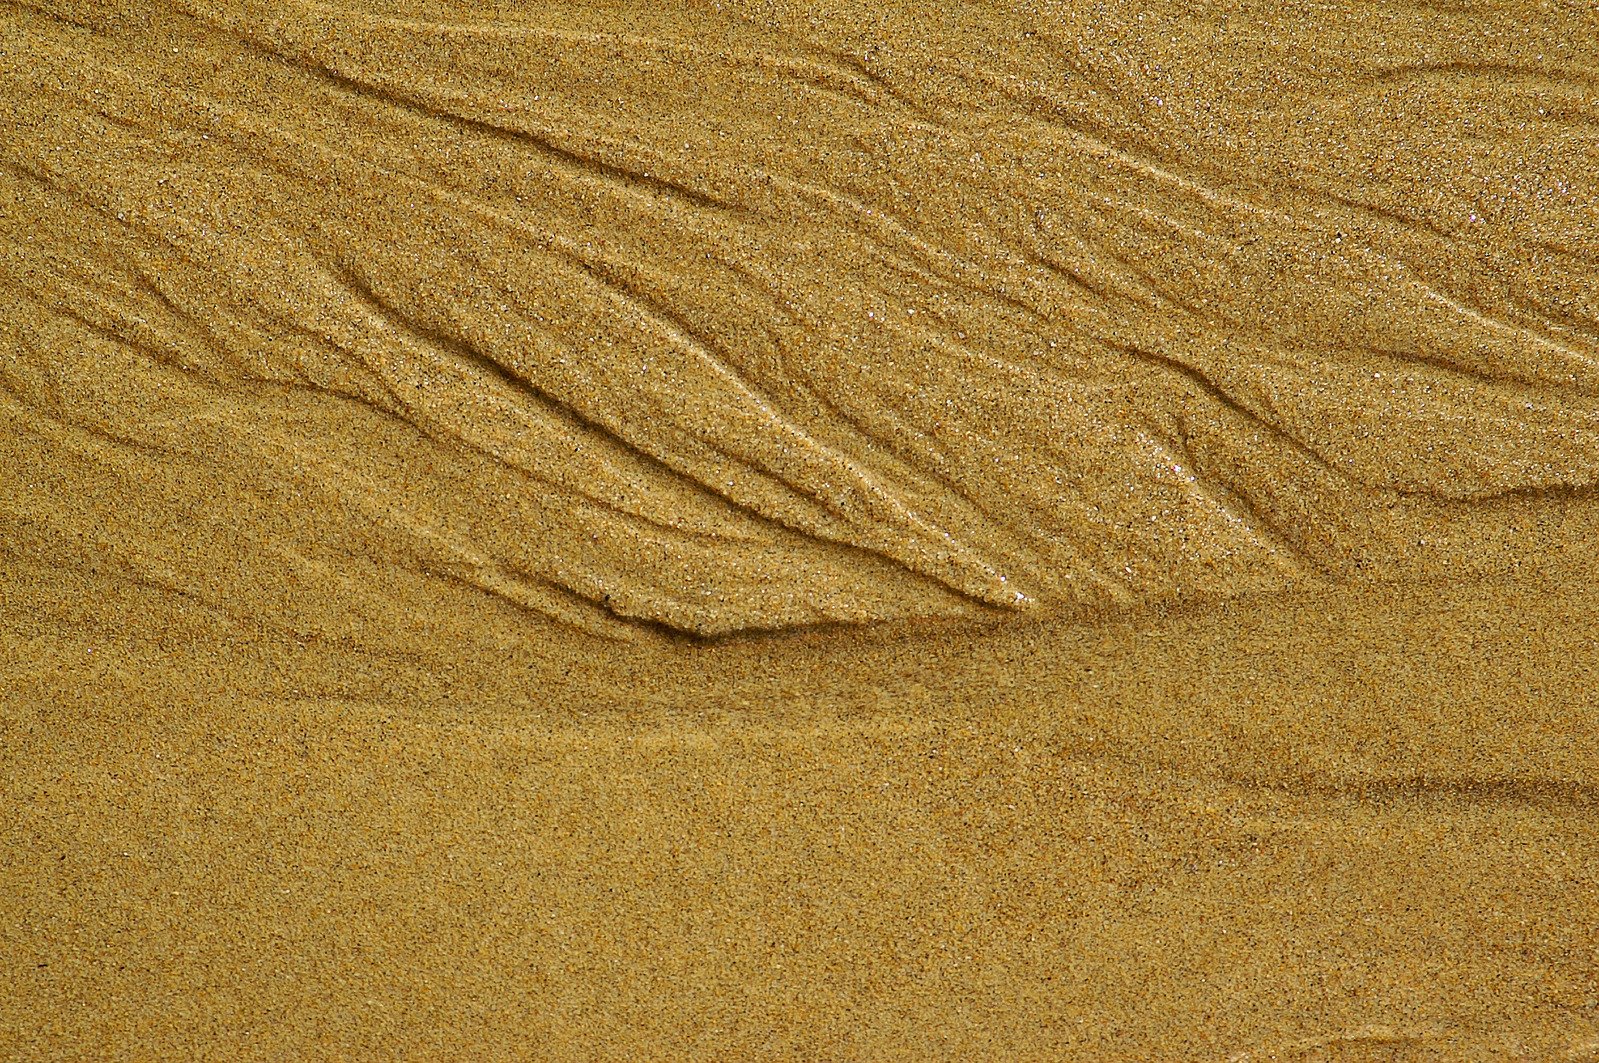 sand has wavy and tiny patterns on it